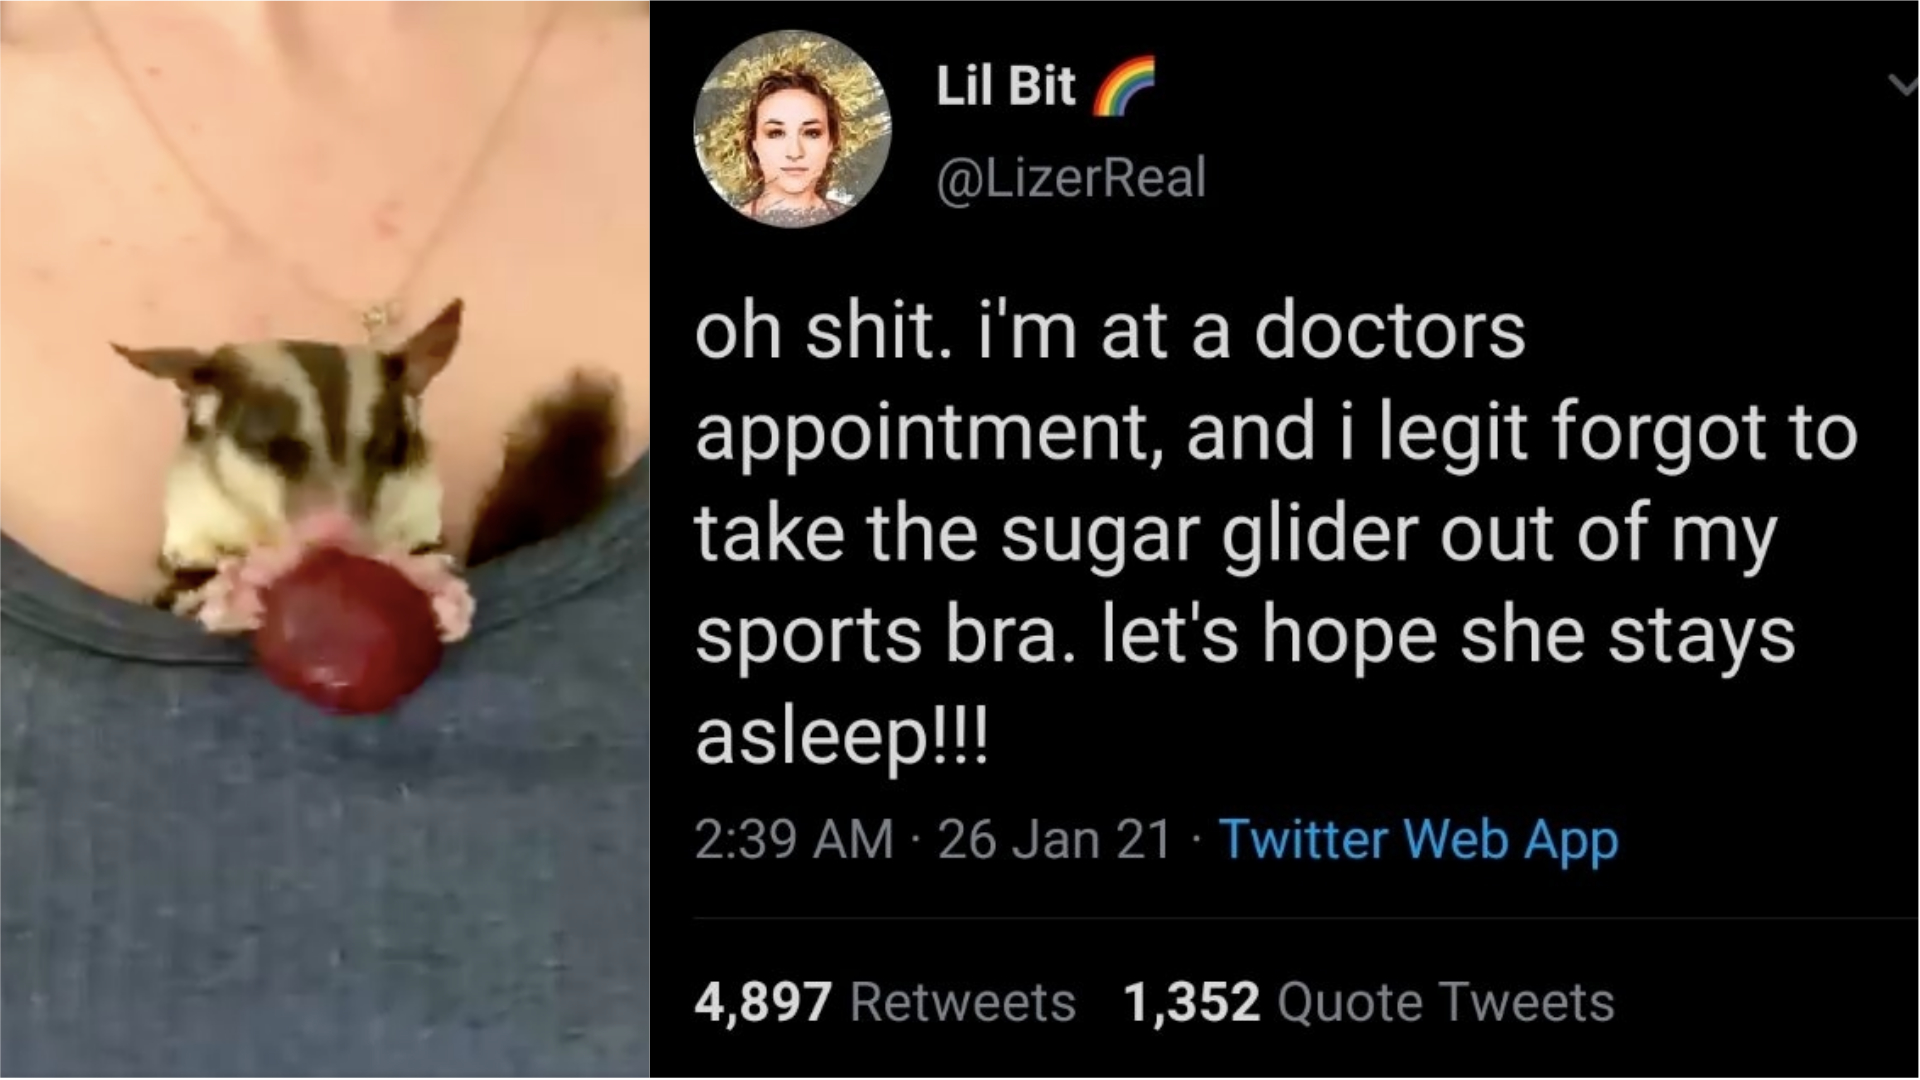 This woman accidentally went to the doctors with a sugar glider in her bra